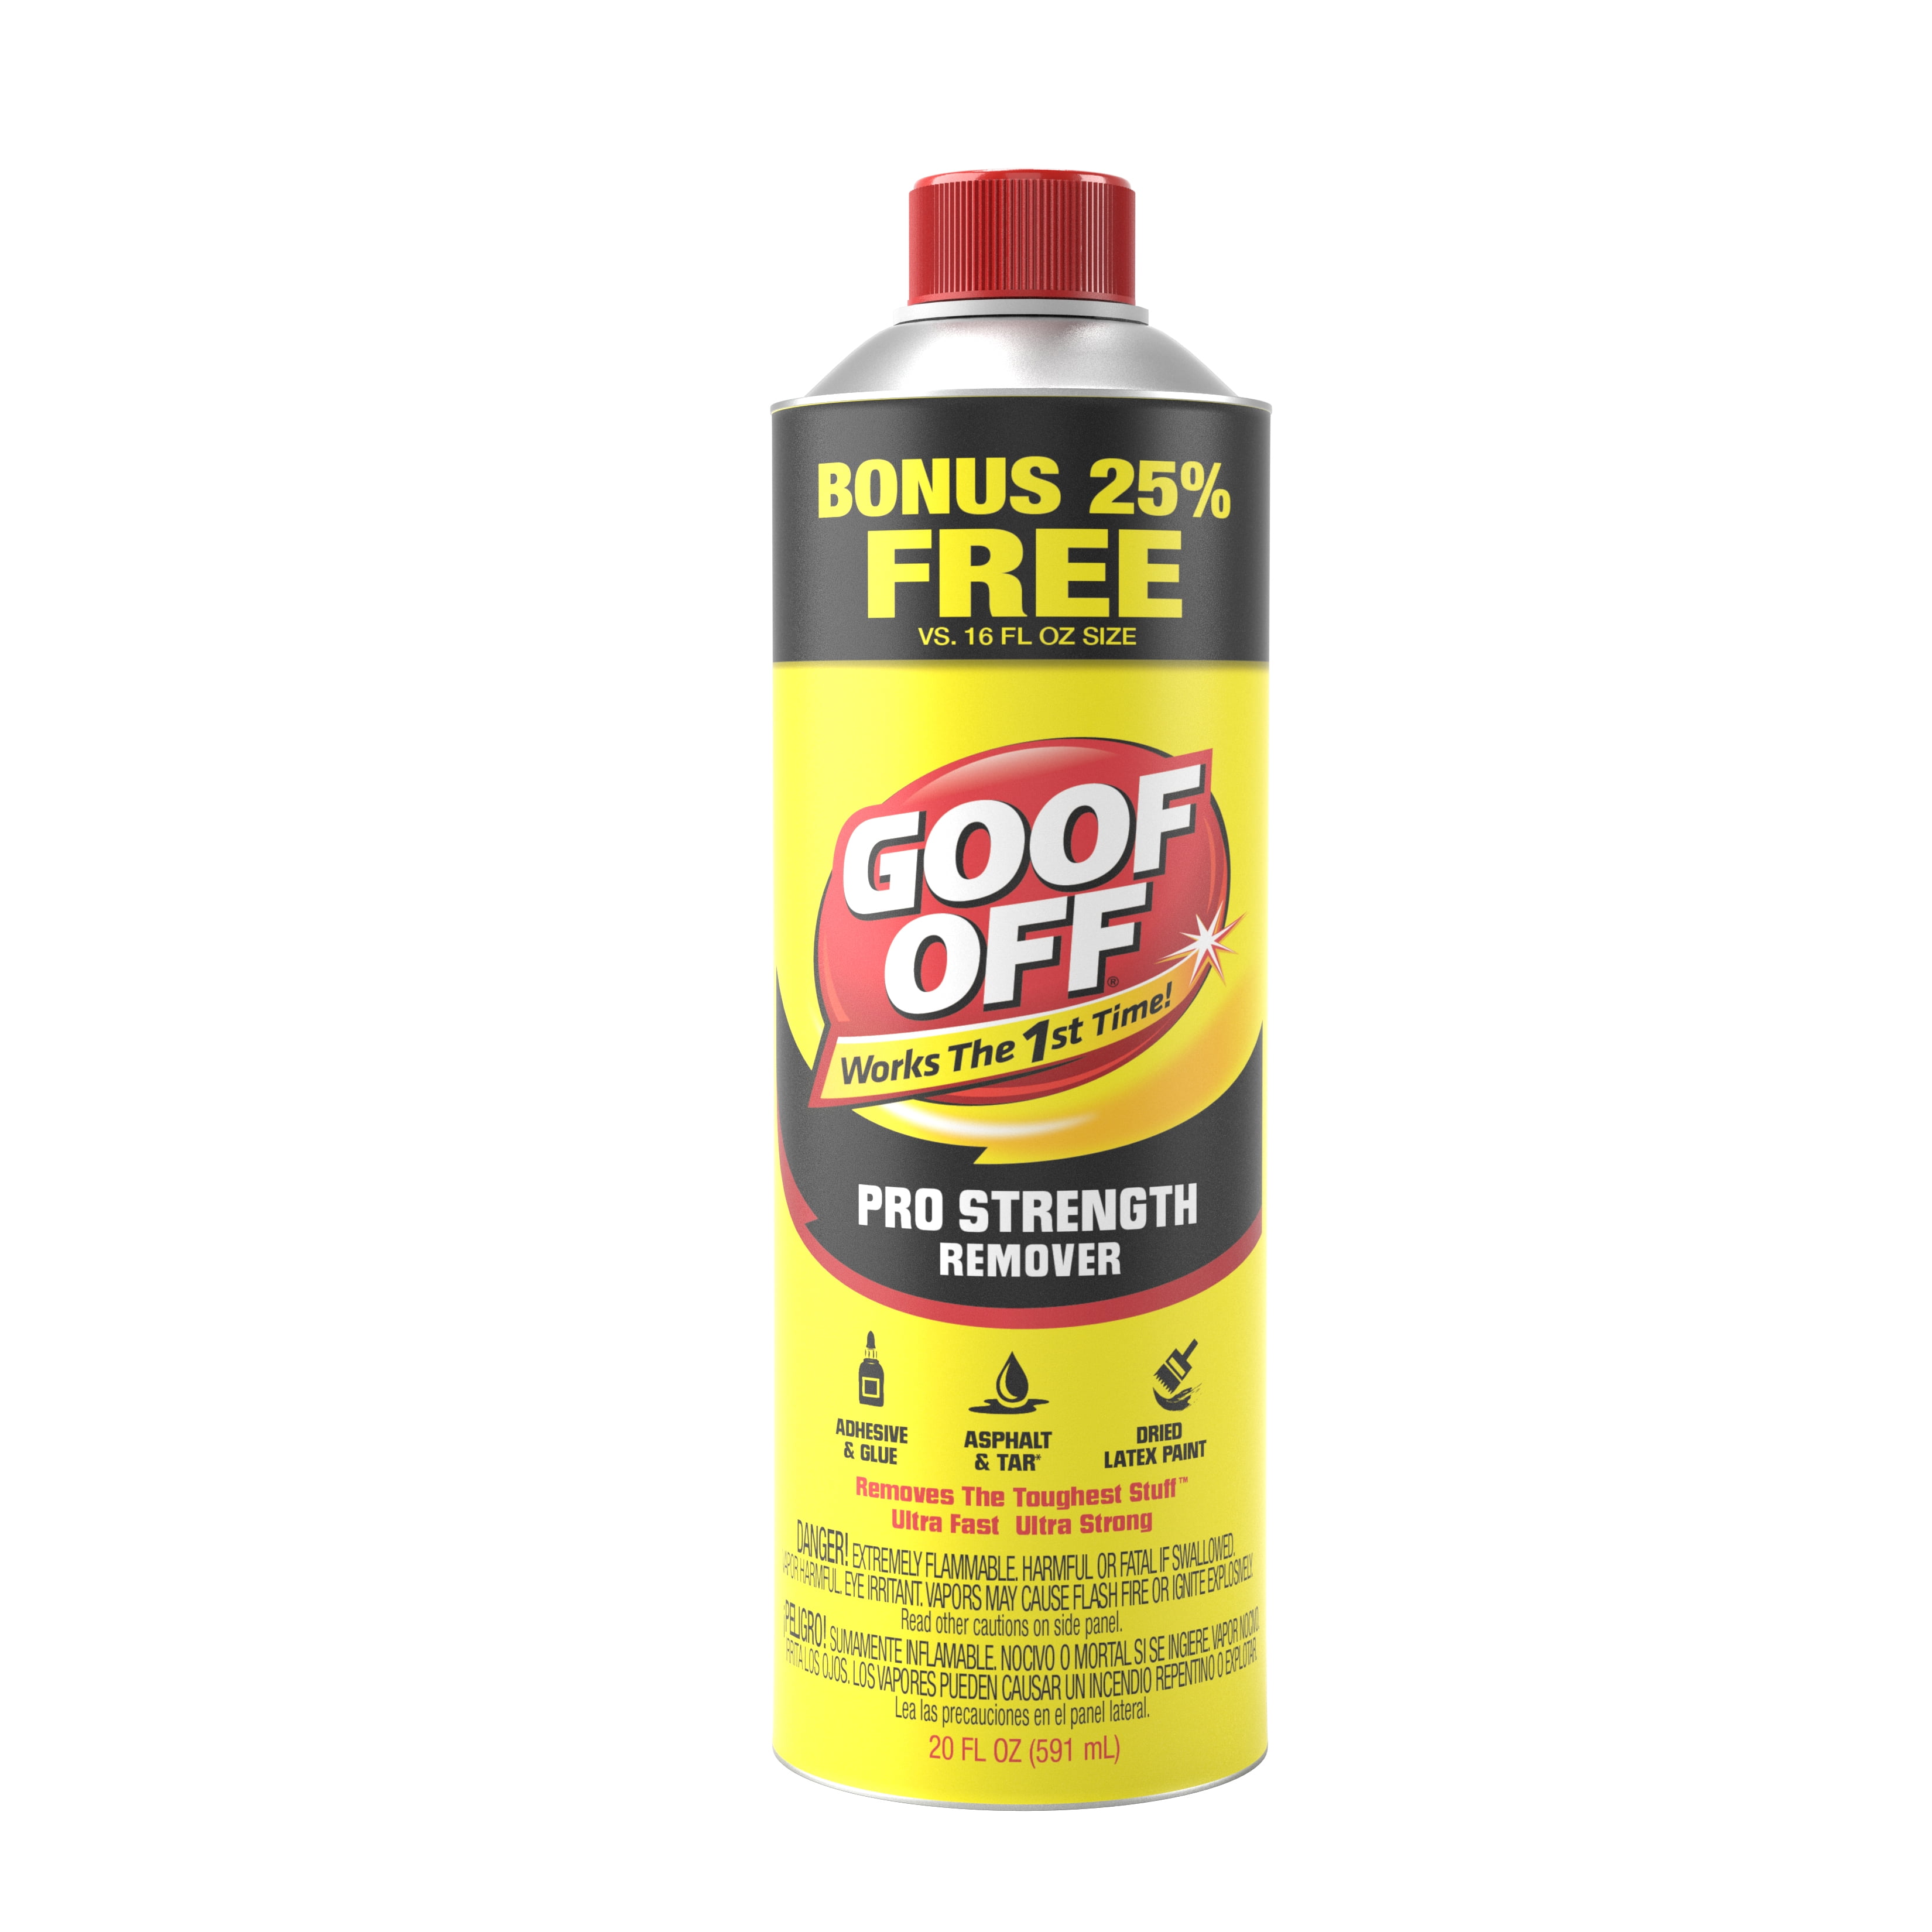 Motsenbocker's Lift Off 41301 22-Ounce Latex Paint Remover Spray is  Environmentally Friendly Safely Removes Latex Paint and Enamel and Works on